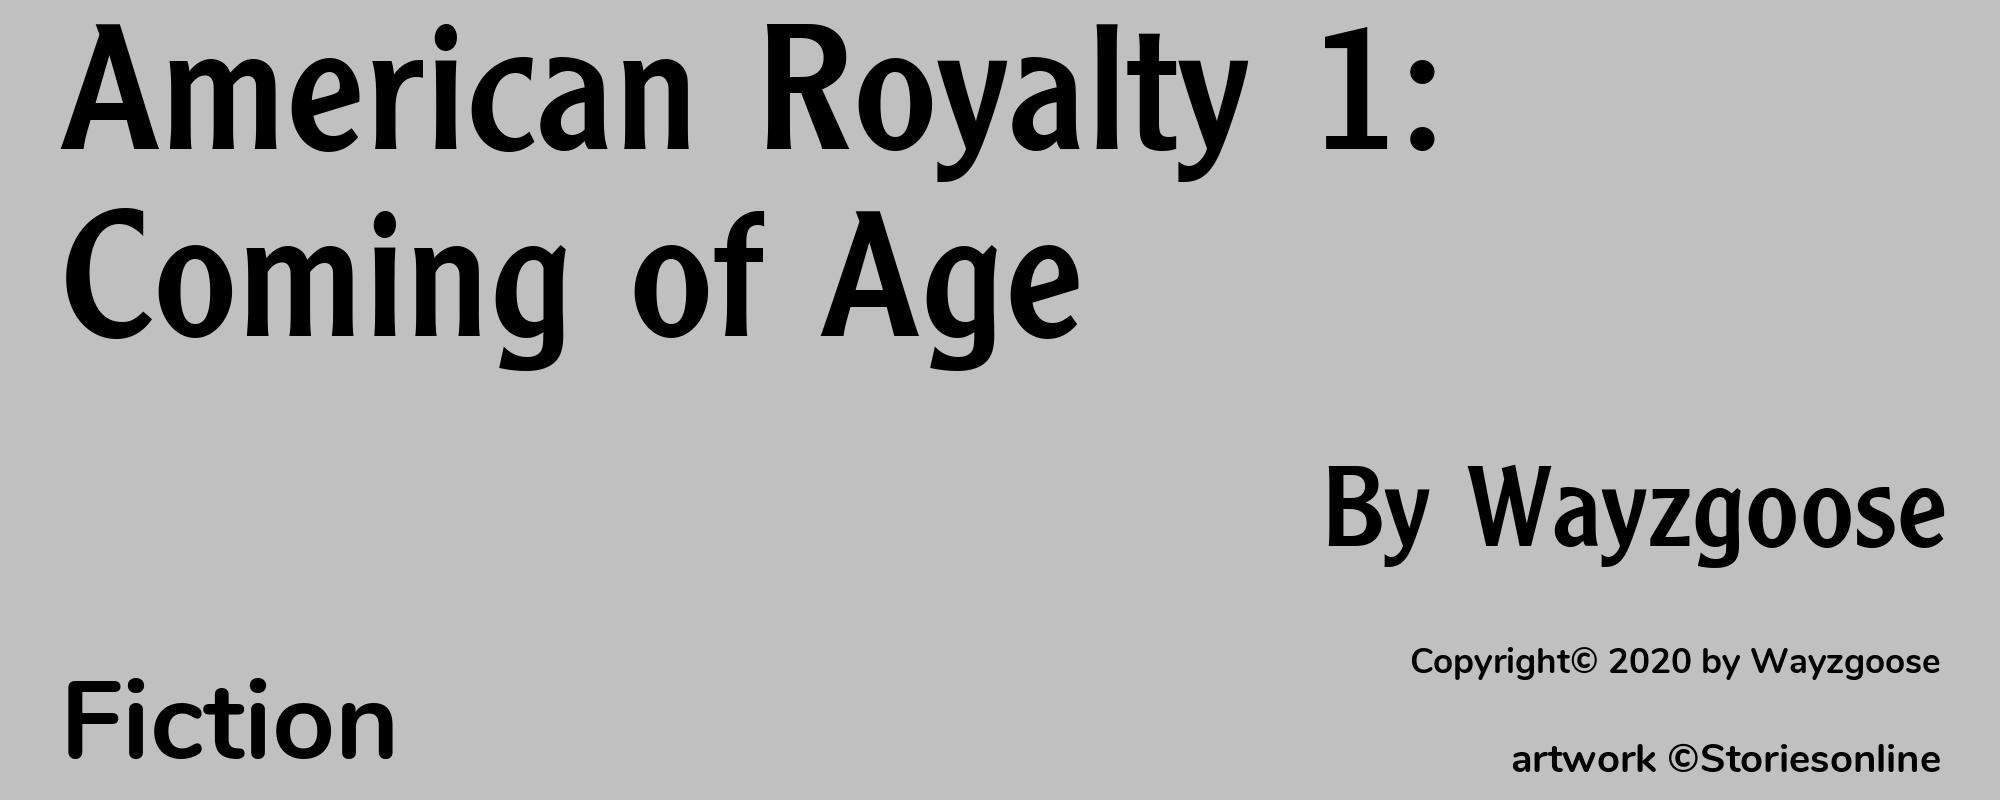 American Royalty 1: Coming of Age - Cover